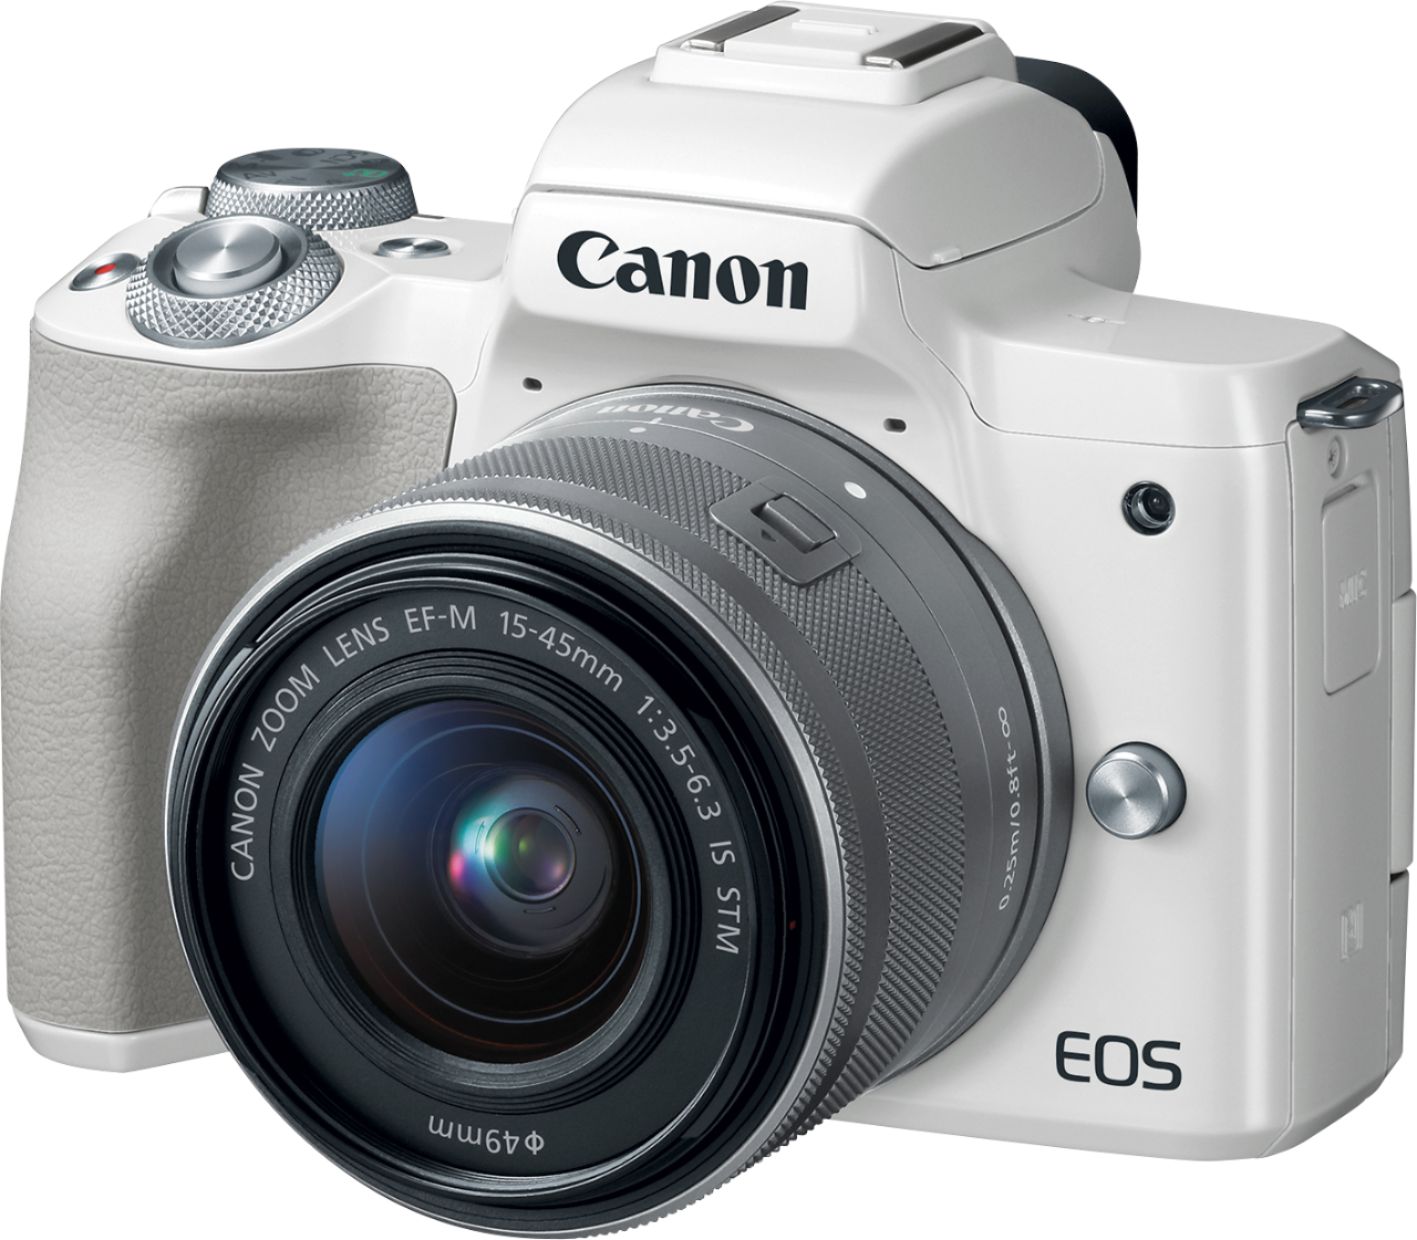 Canon M50 Mirrorless Camera EF-M 15-45mm f/3.5-6.3 IS STM Zoom Lens White 2681C011 - Best Buy